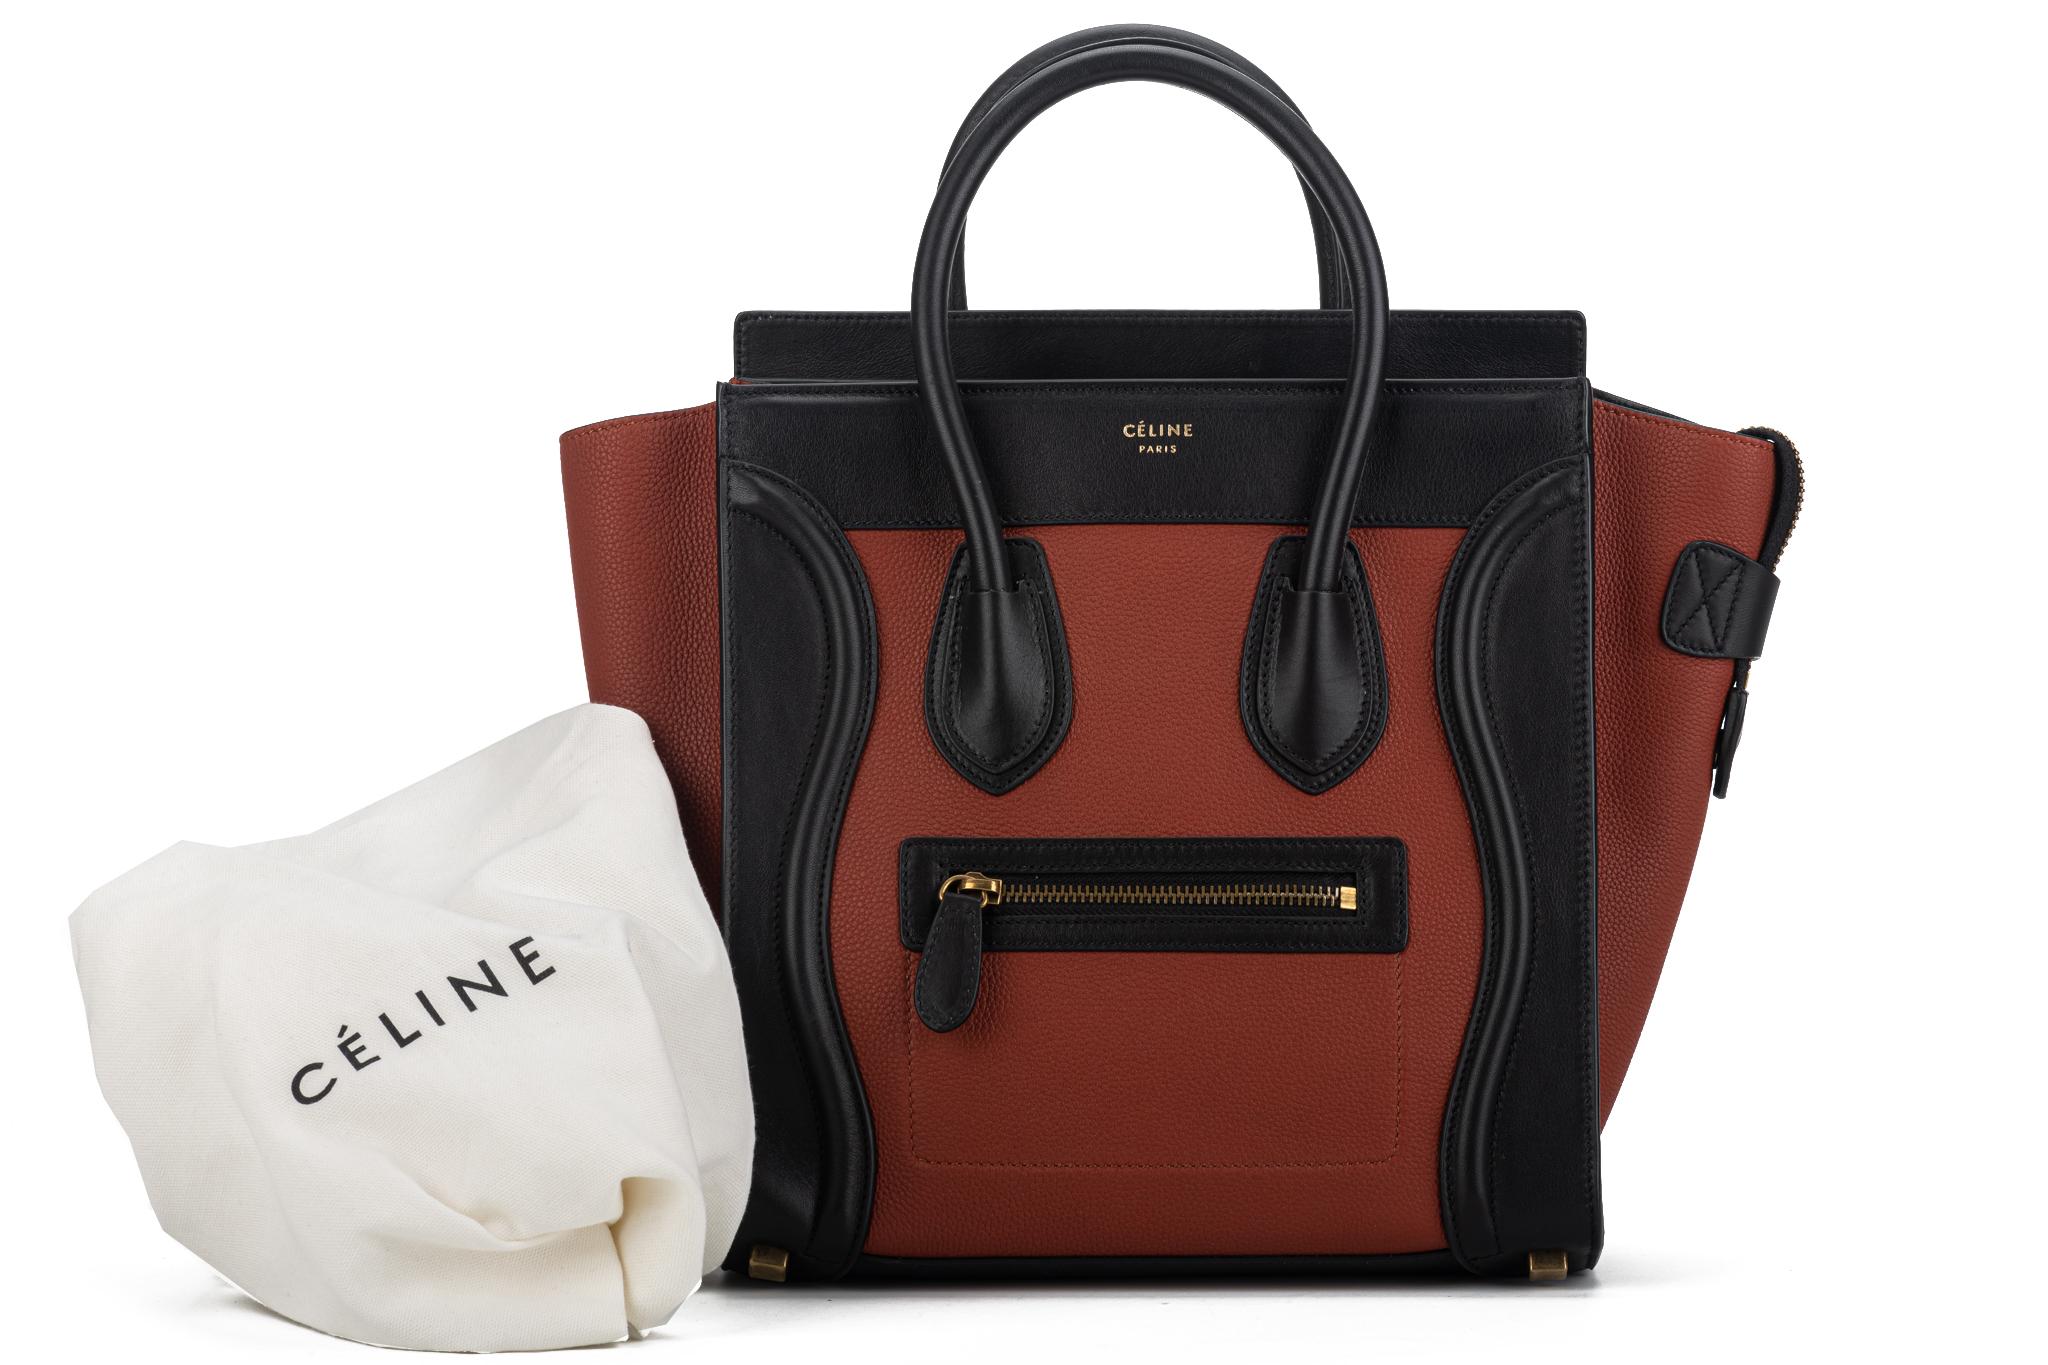 Celine brand new bicolor. micro luggage bag. Comes with original dust cover. Store retail $3150 plus tax.